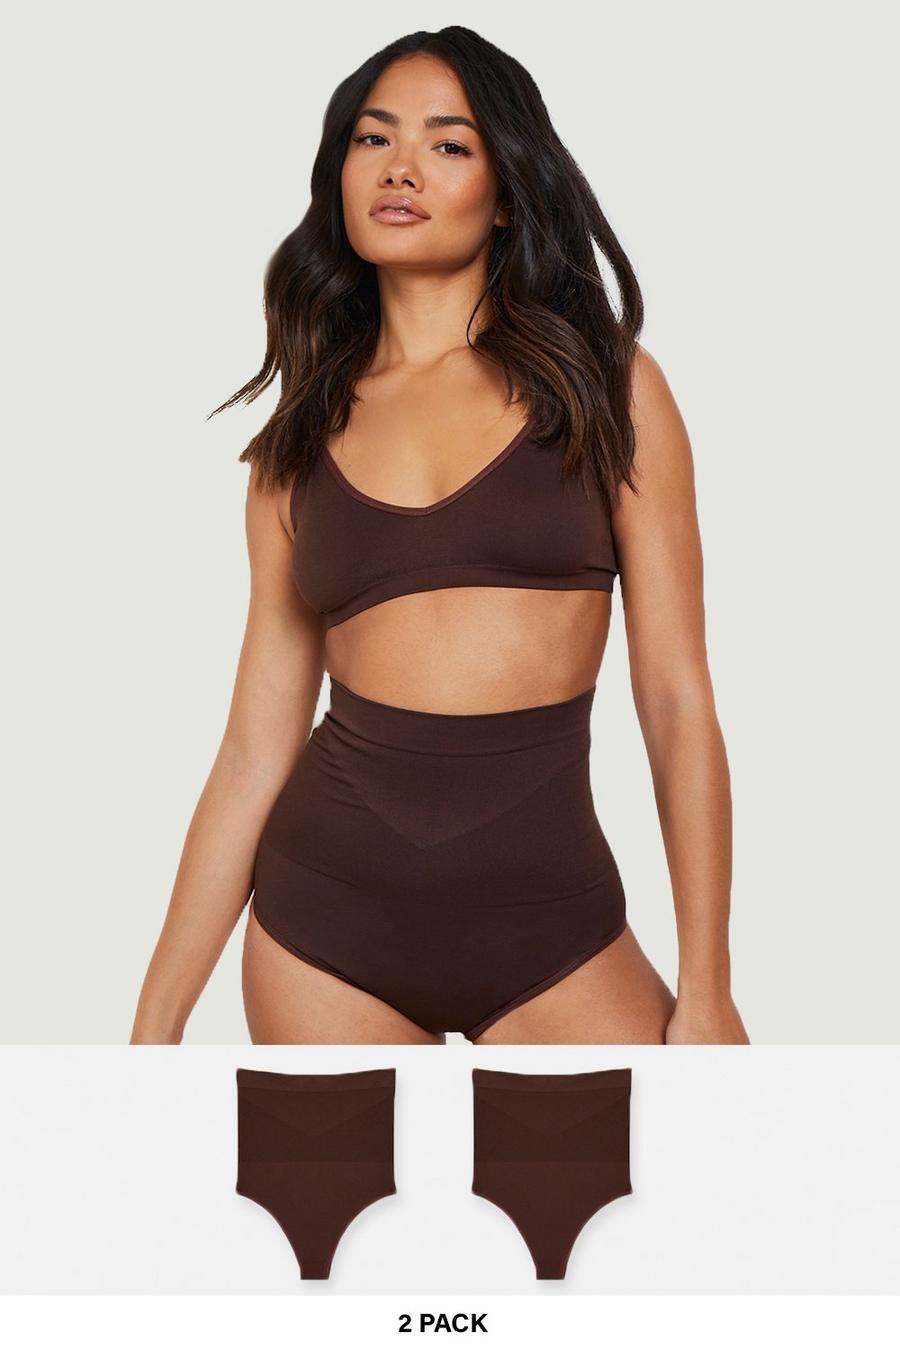 Chocolate brown 2 Pack High Waist Shaping Control Brief